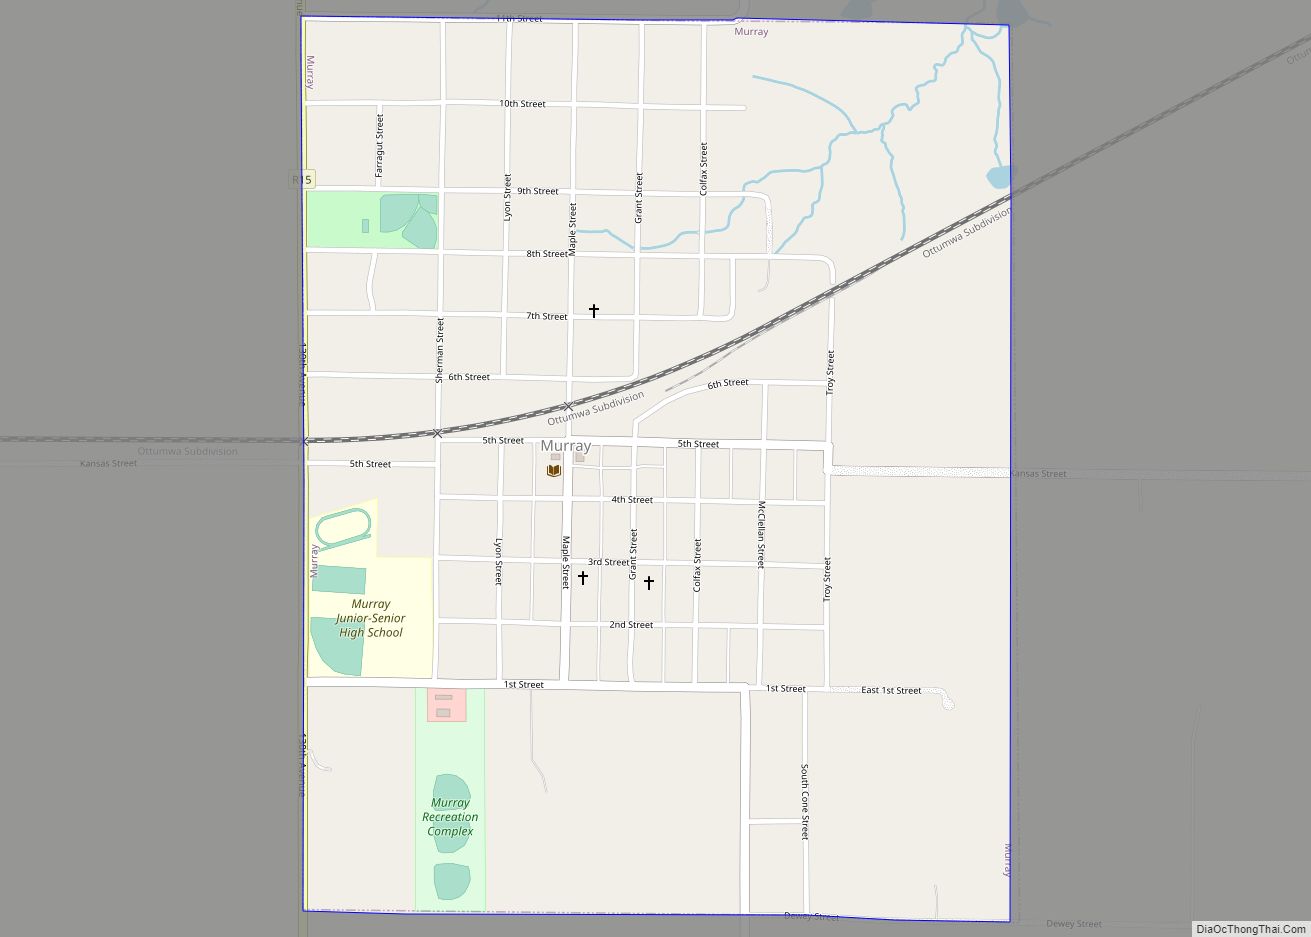 Map of Murray city